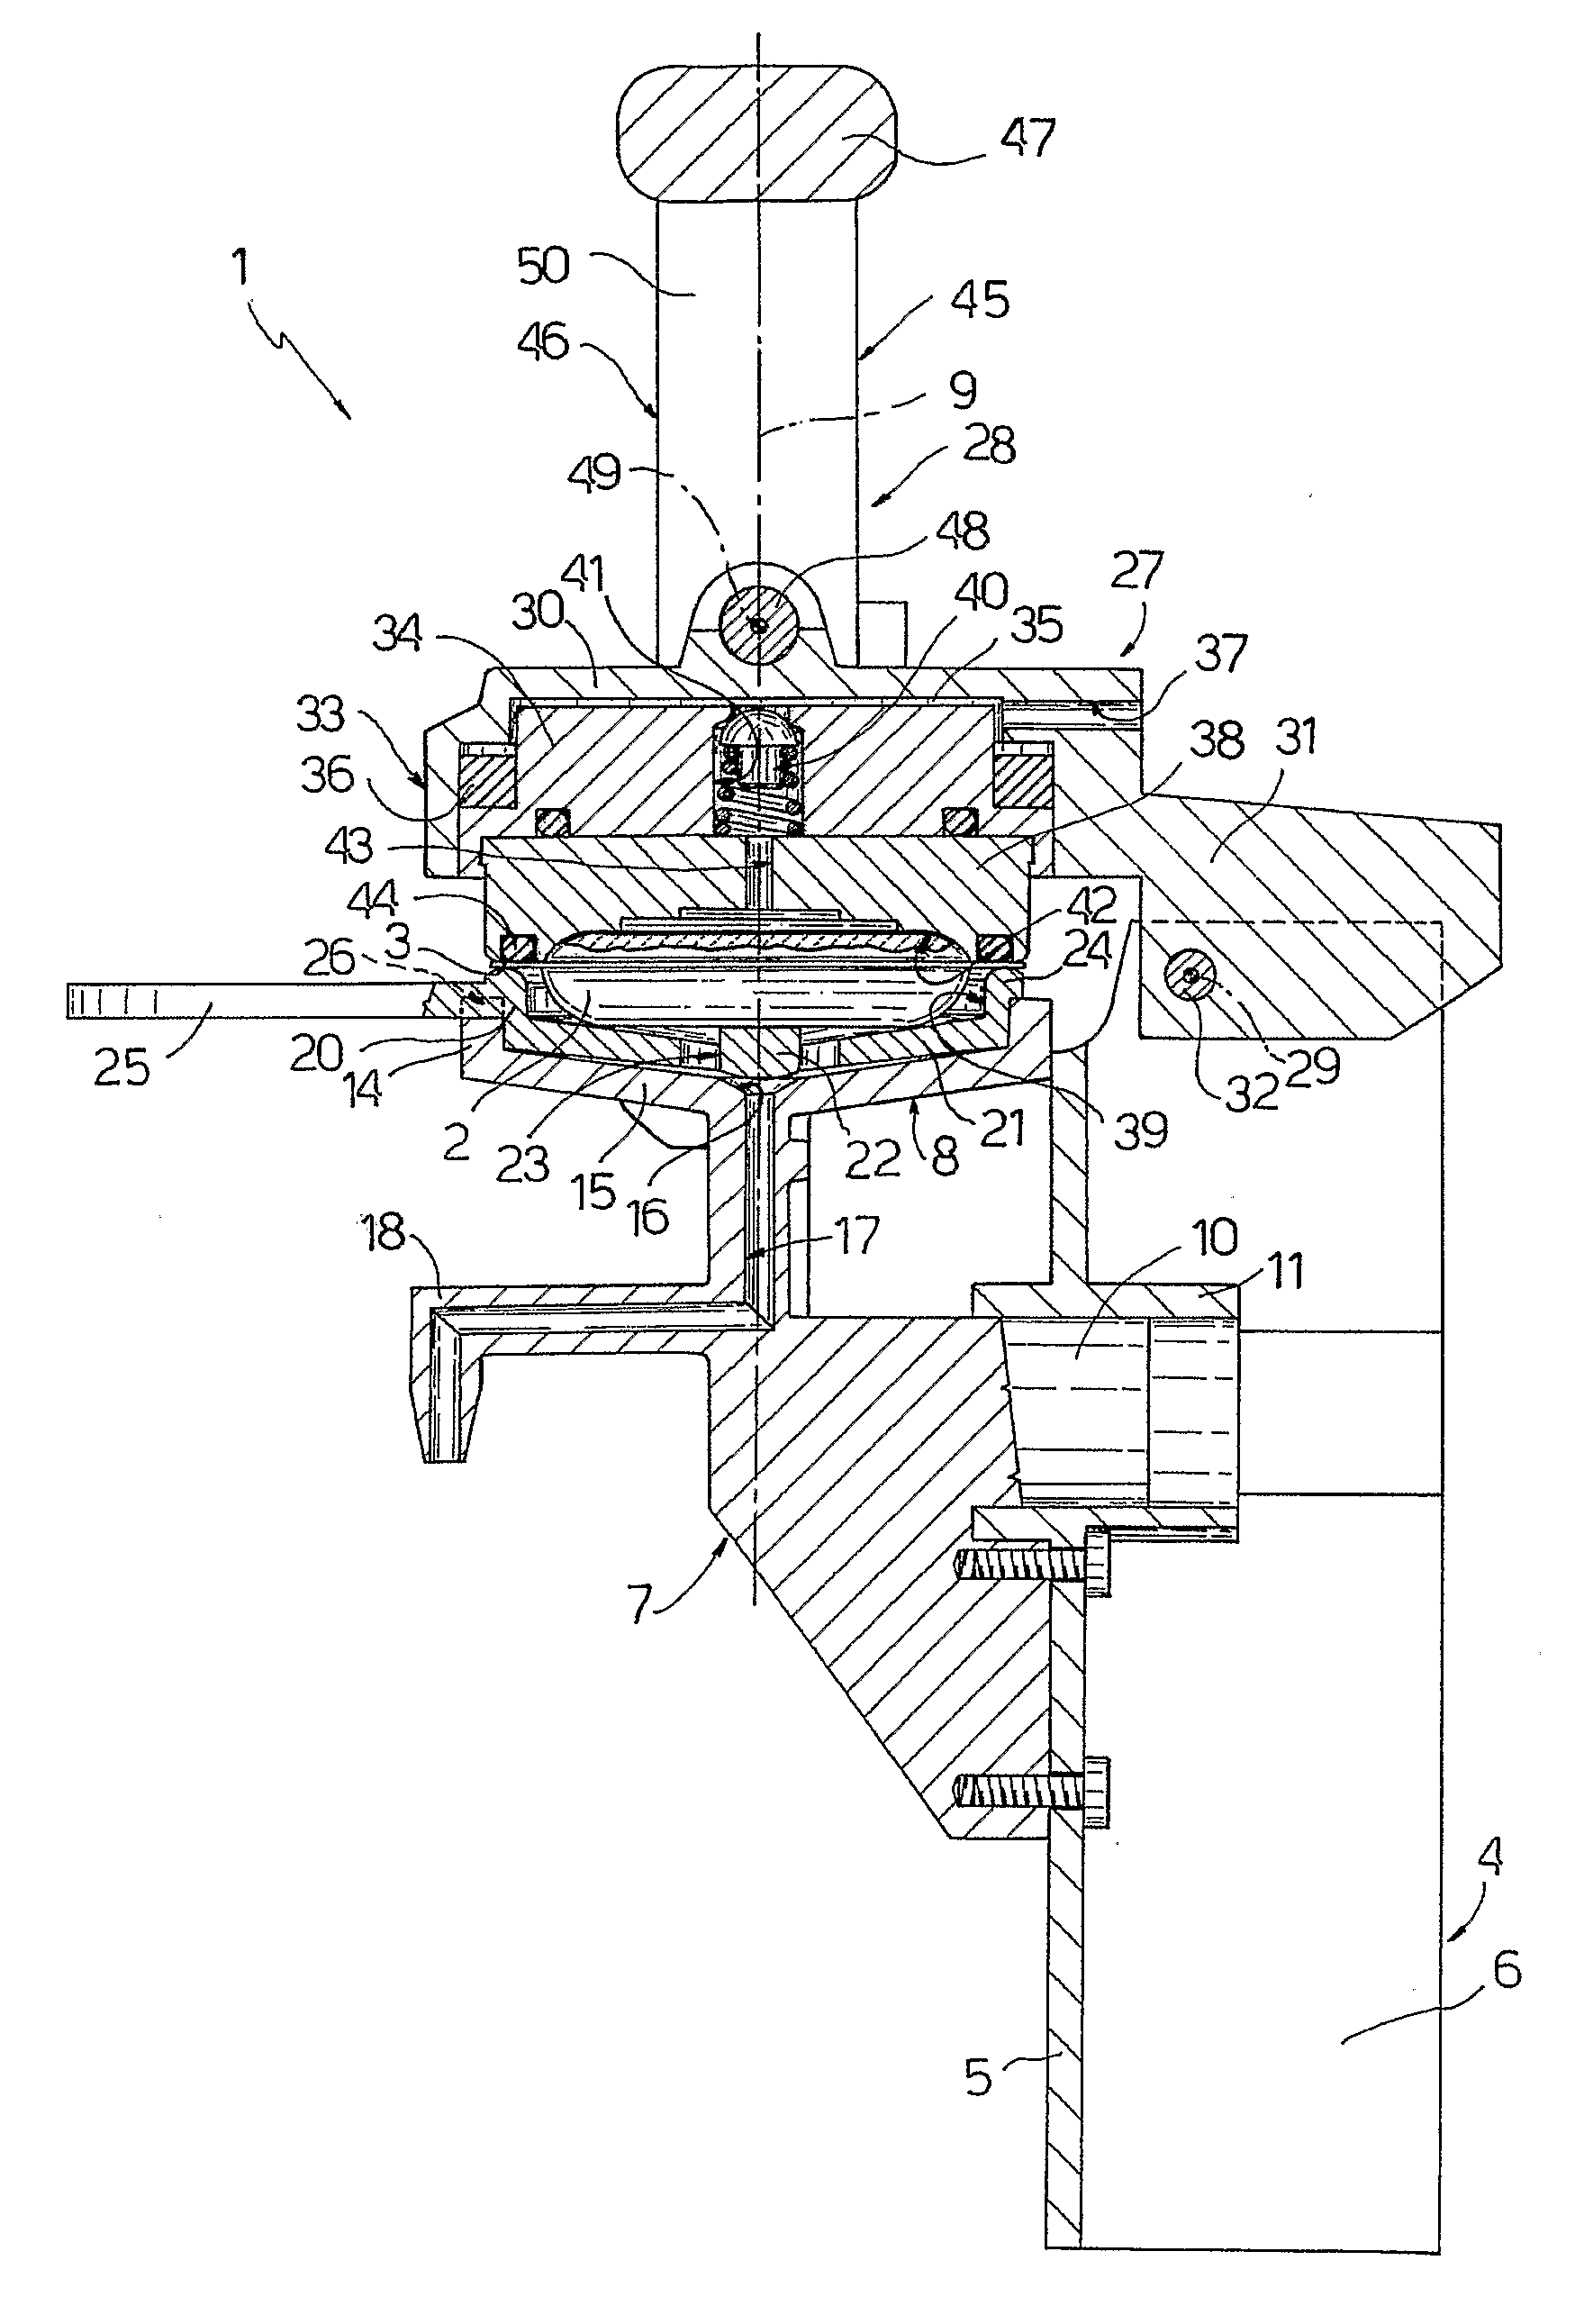 Percolator For Producing A Beverage From Powdered Material In A Container